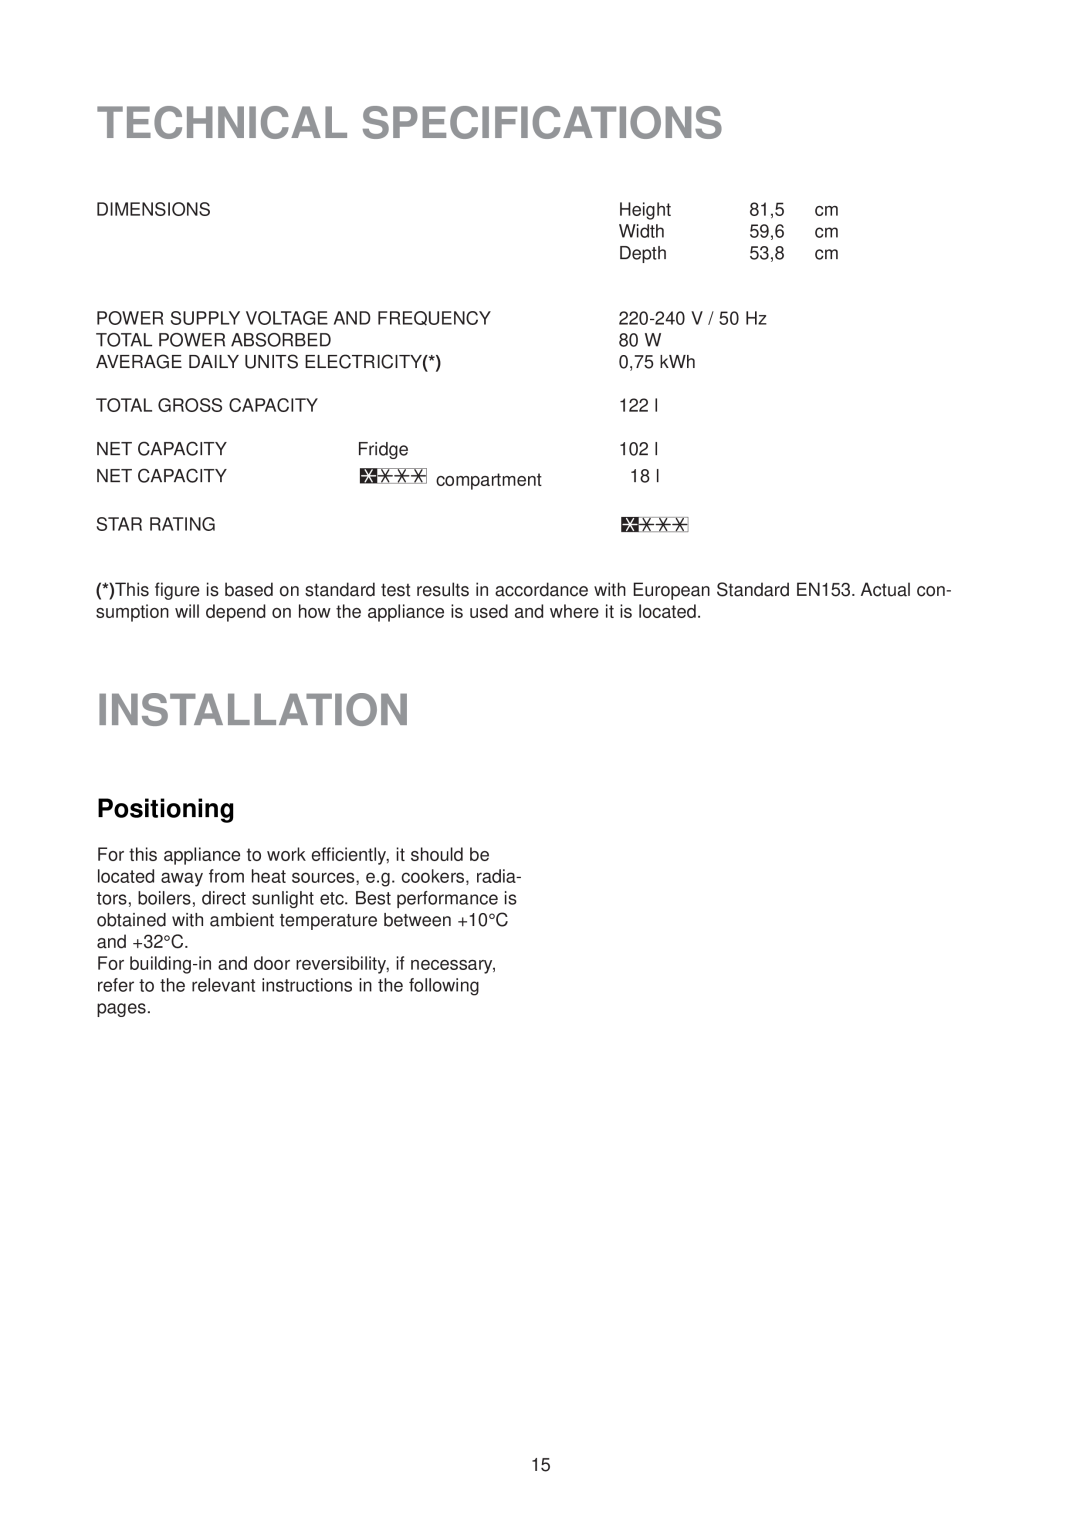 Electrolux ER 6336 U manual Technical Specifications, Installation, Positioning 